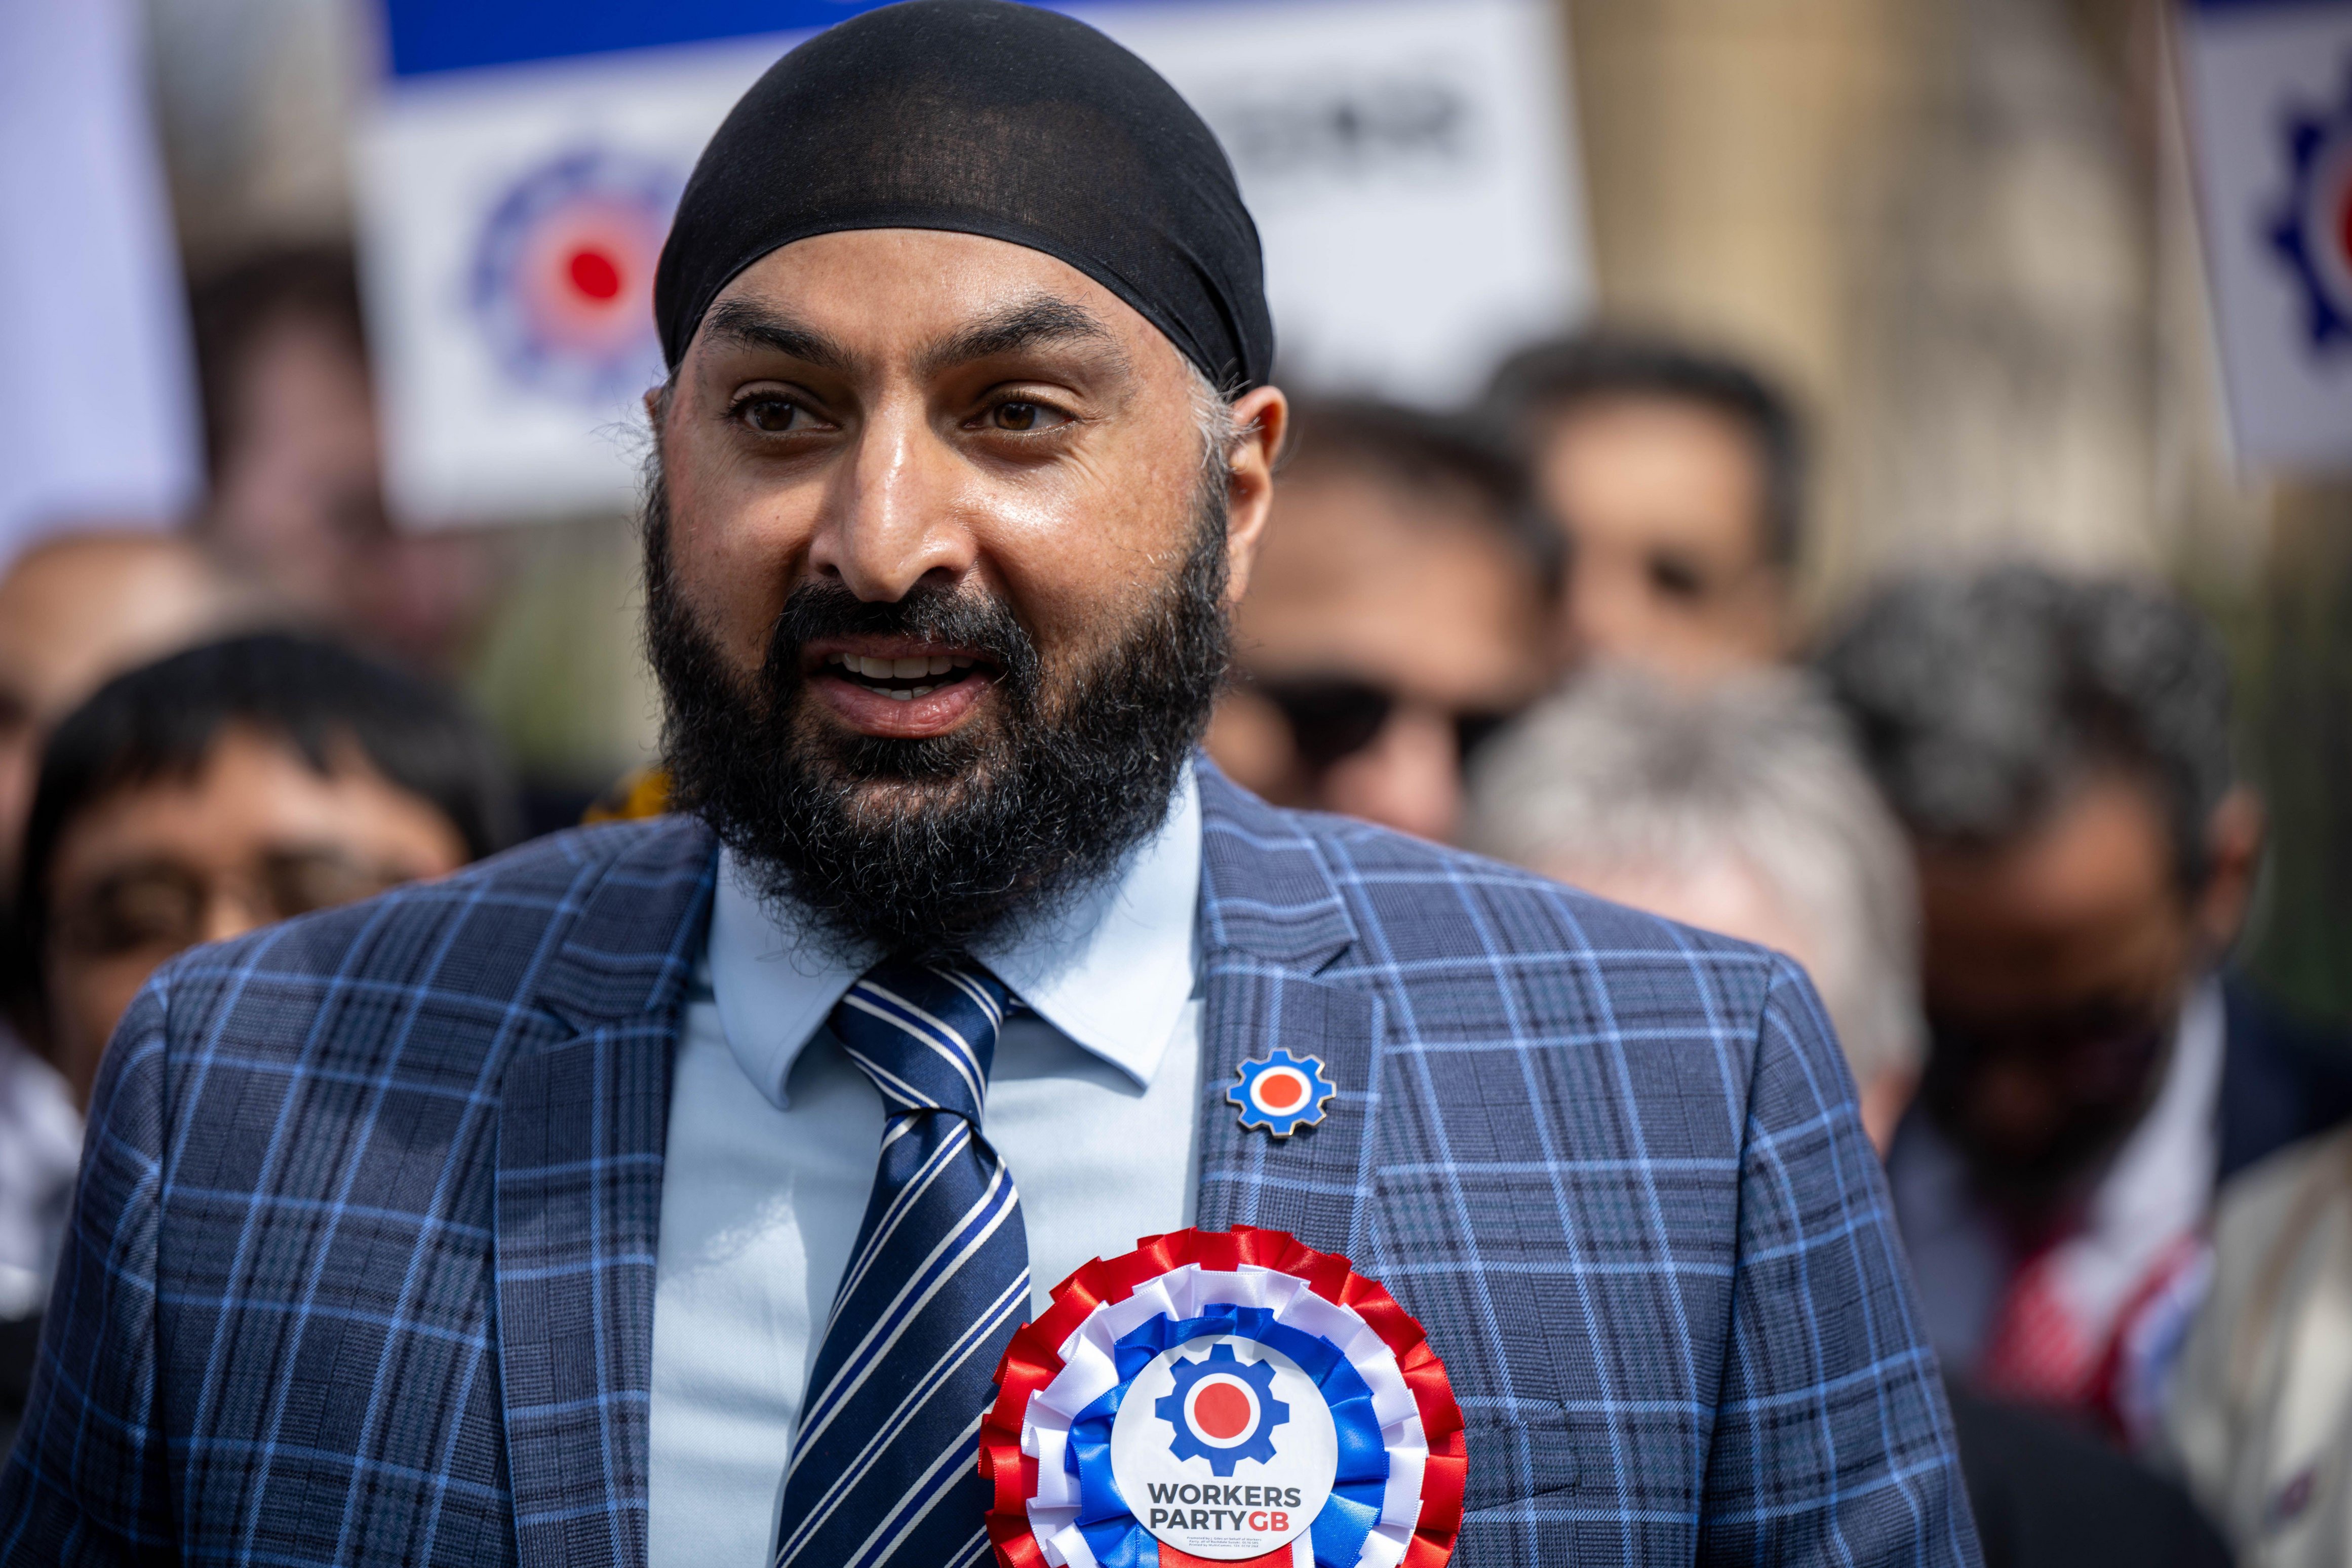 Monty Panesar today announced he will run as the Workers' Party of Britain candidate for Ealing Southall